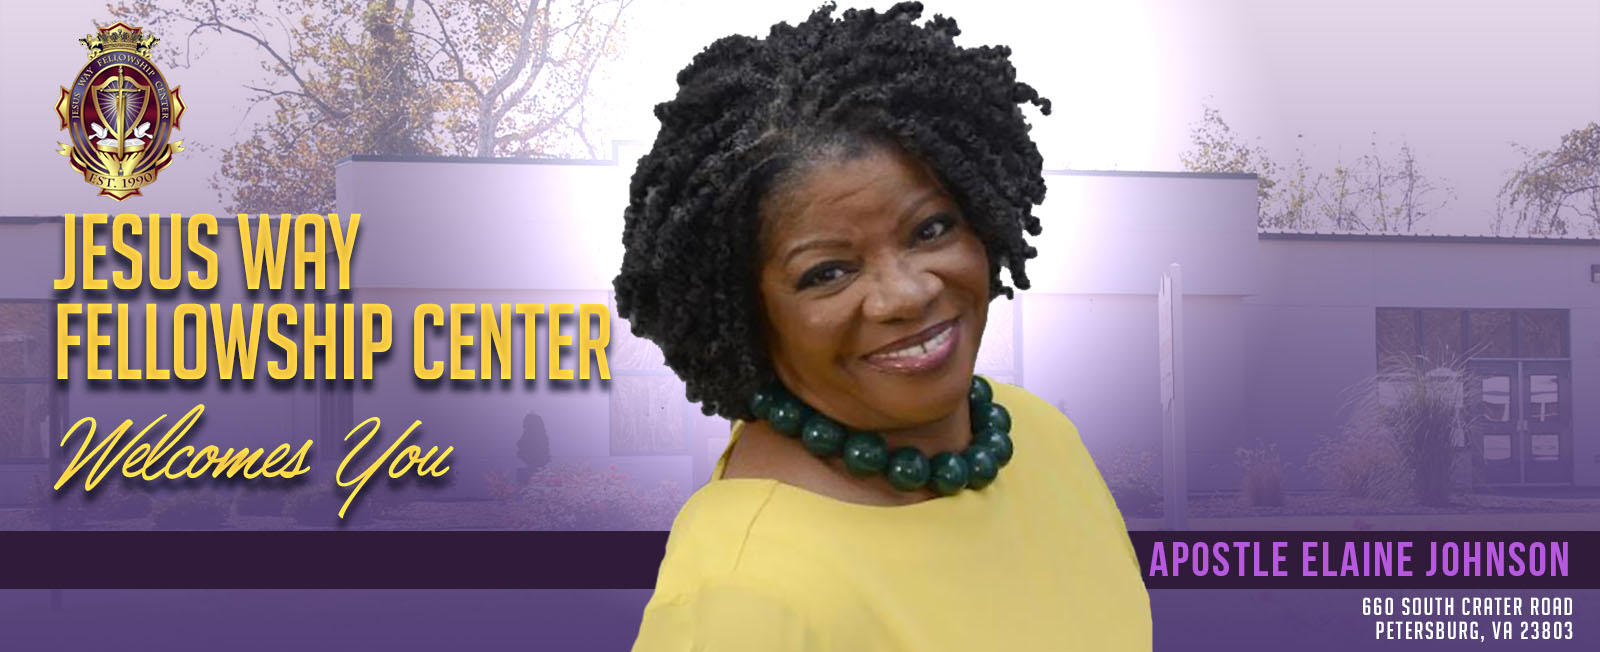 Apostle Elaine Johnson and JWFC Welcomes You